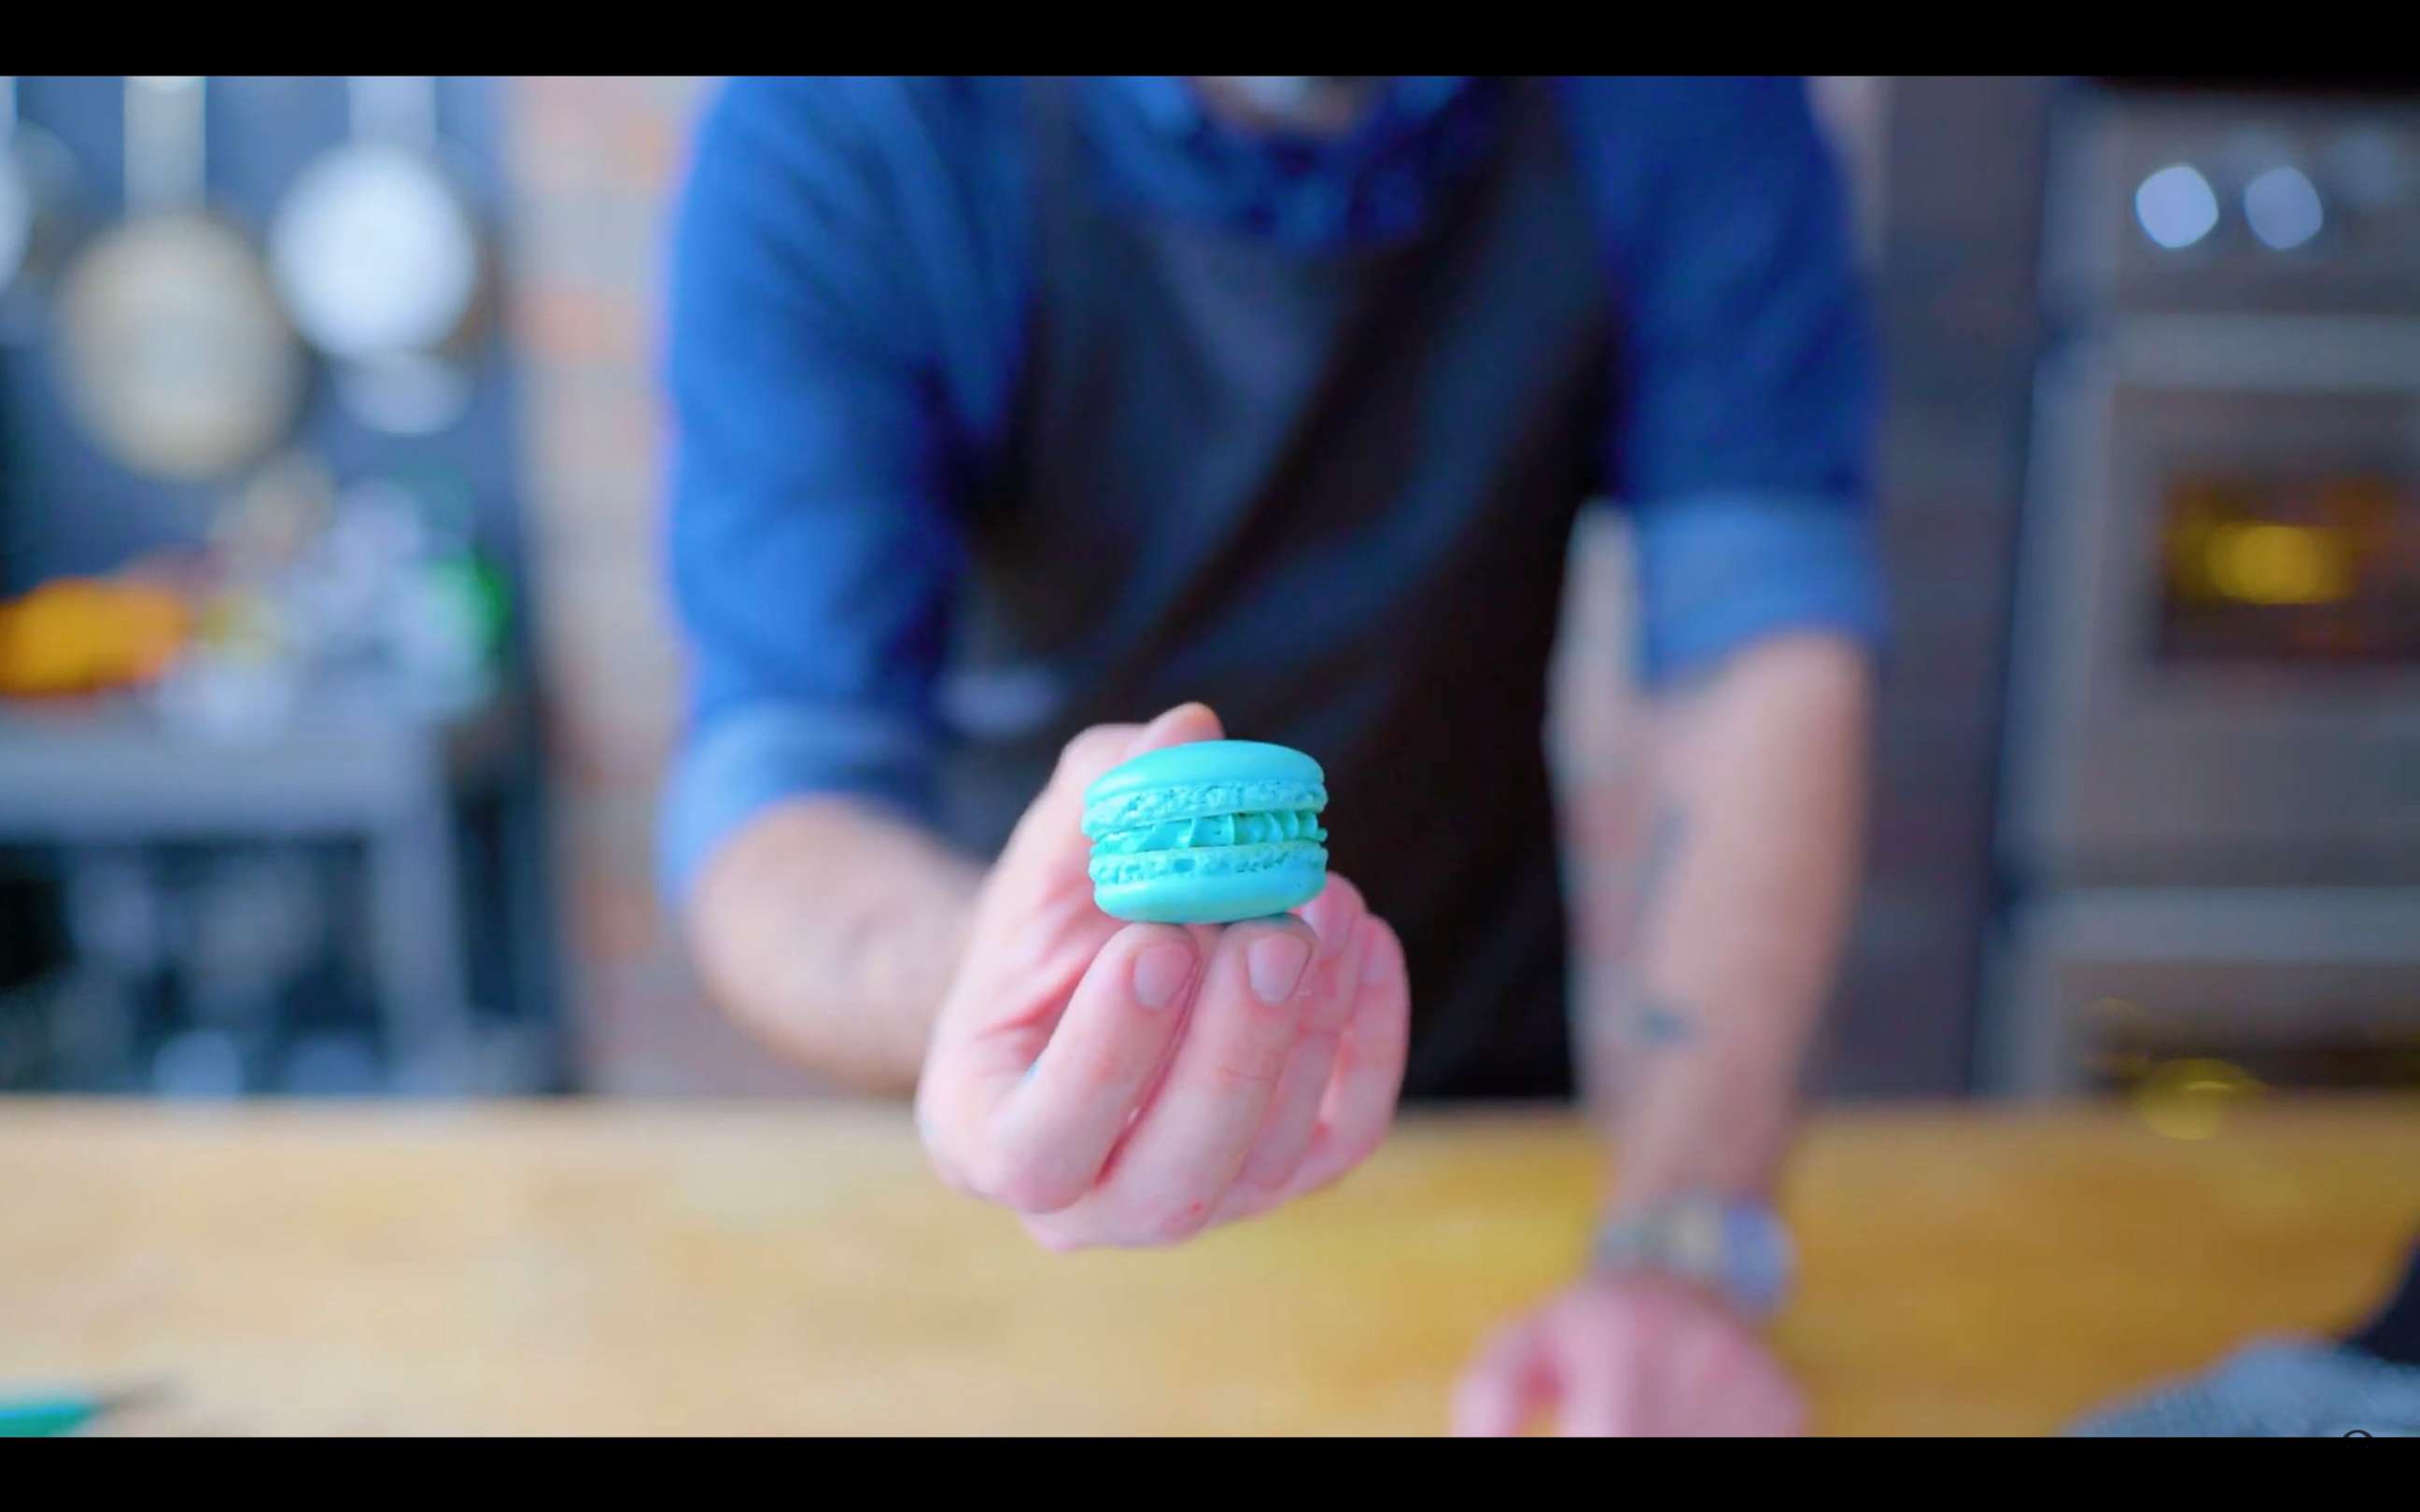 PHOTO: Andrew Rae baked blue macarons from "The Mandalorian" on "Binging with Babish."